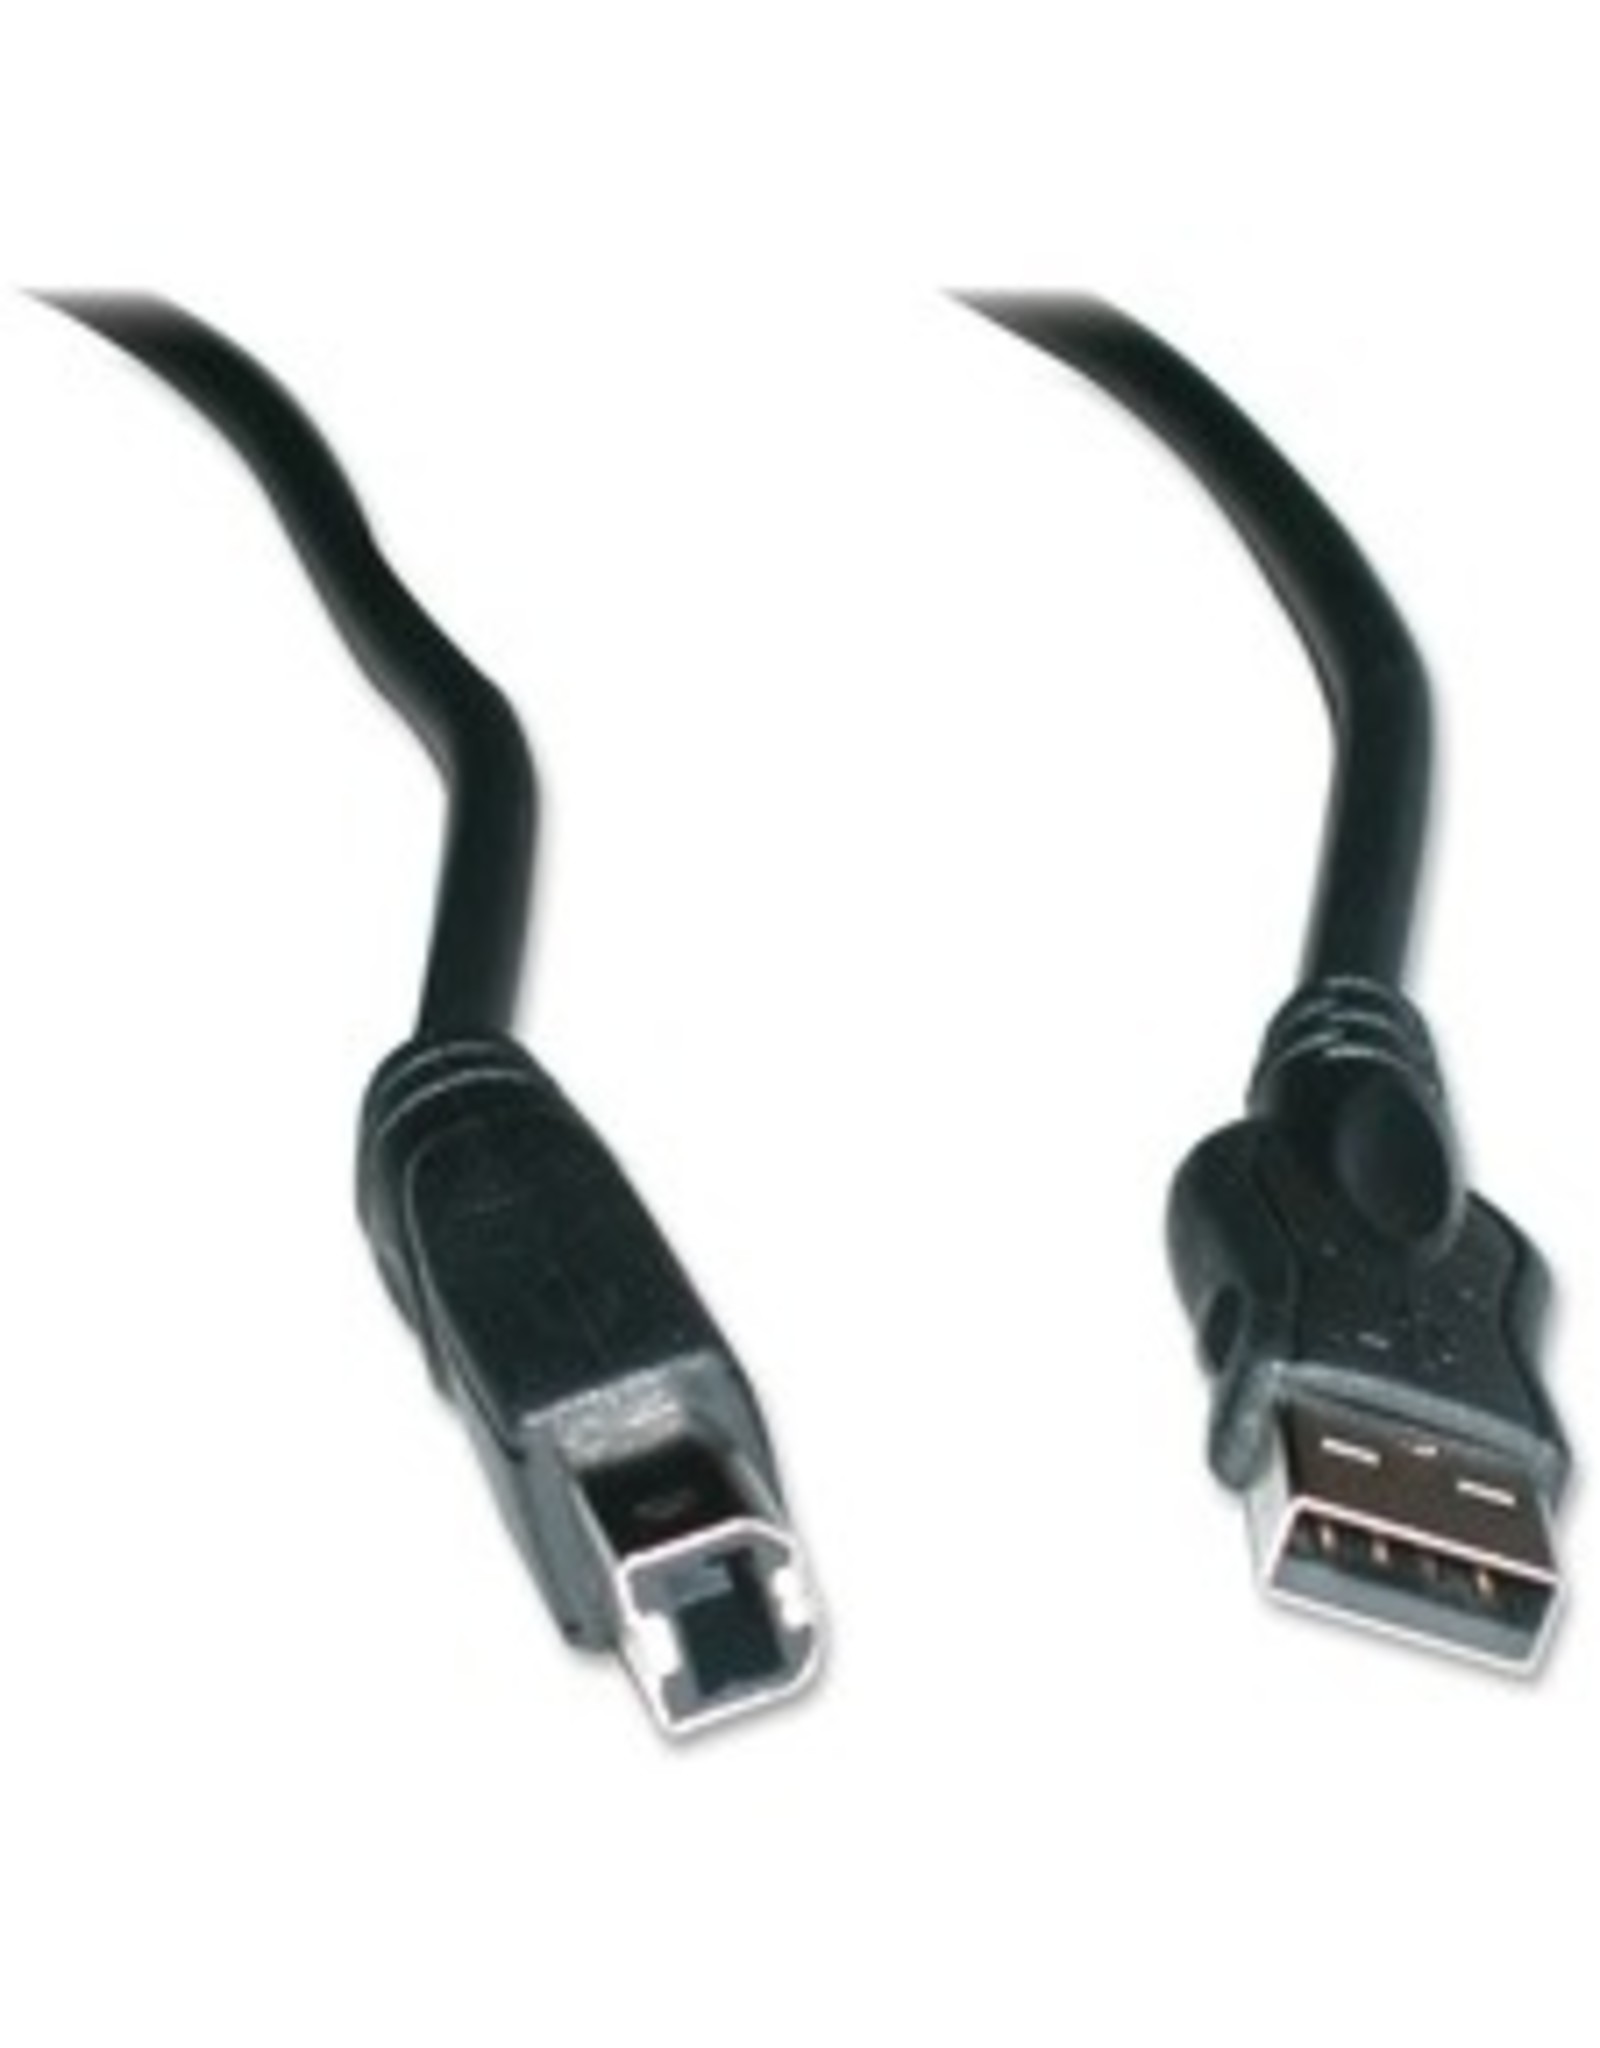 CABLE*USB AM/BM 2.0 SPEED 15'